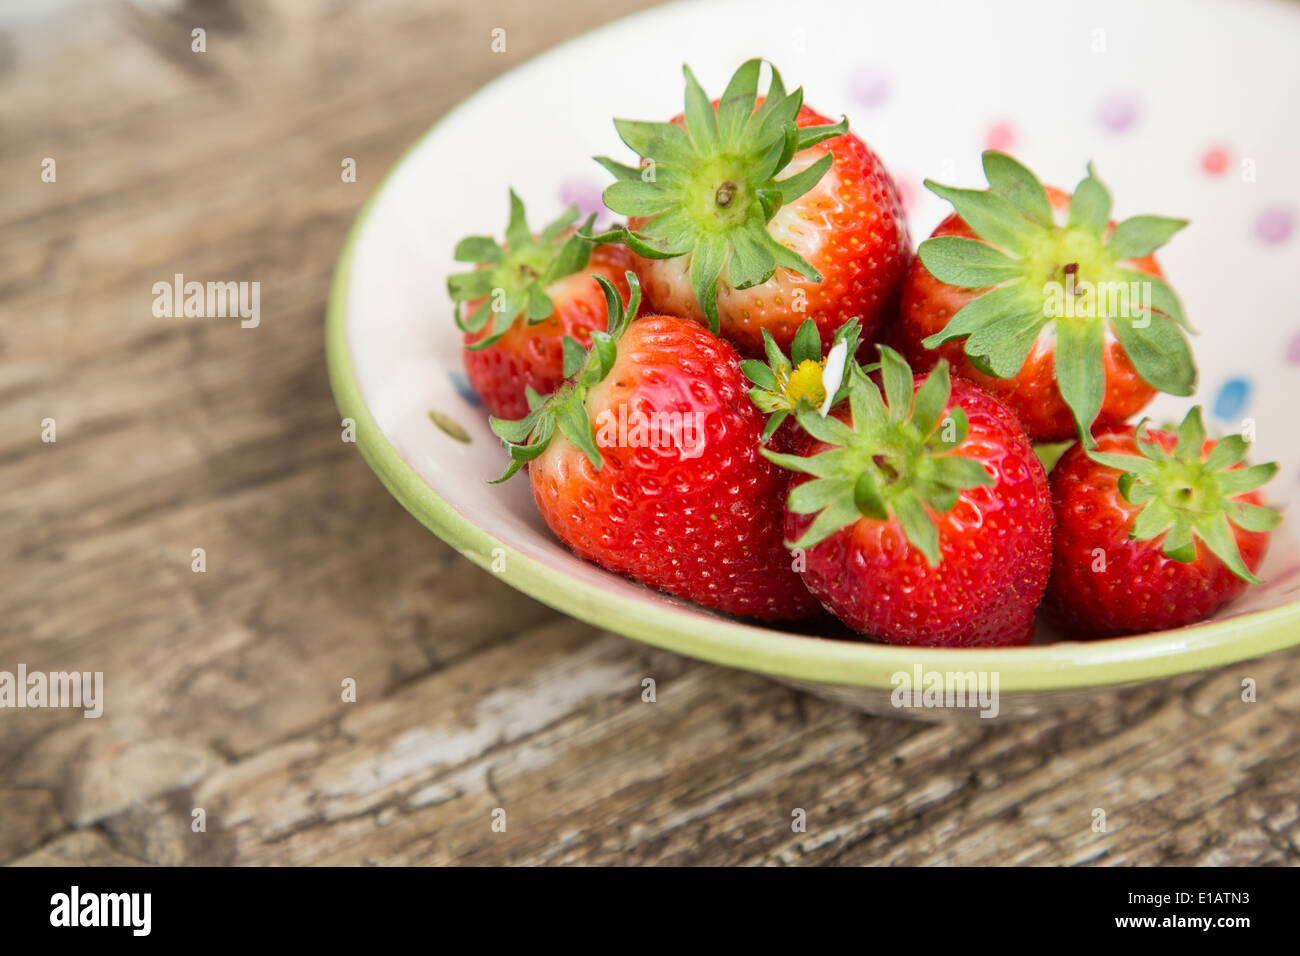 whole strawberries in spotted ceramic rustic bowl, on rustic wood table Stock Photo